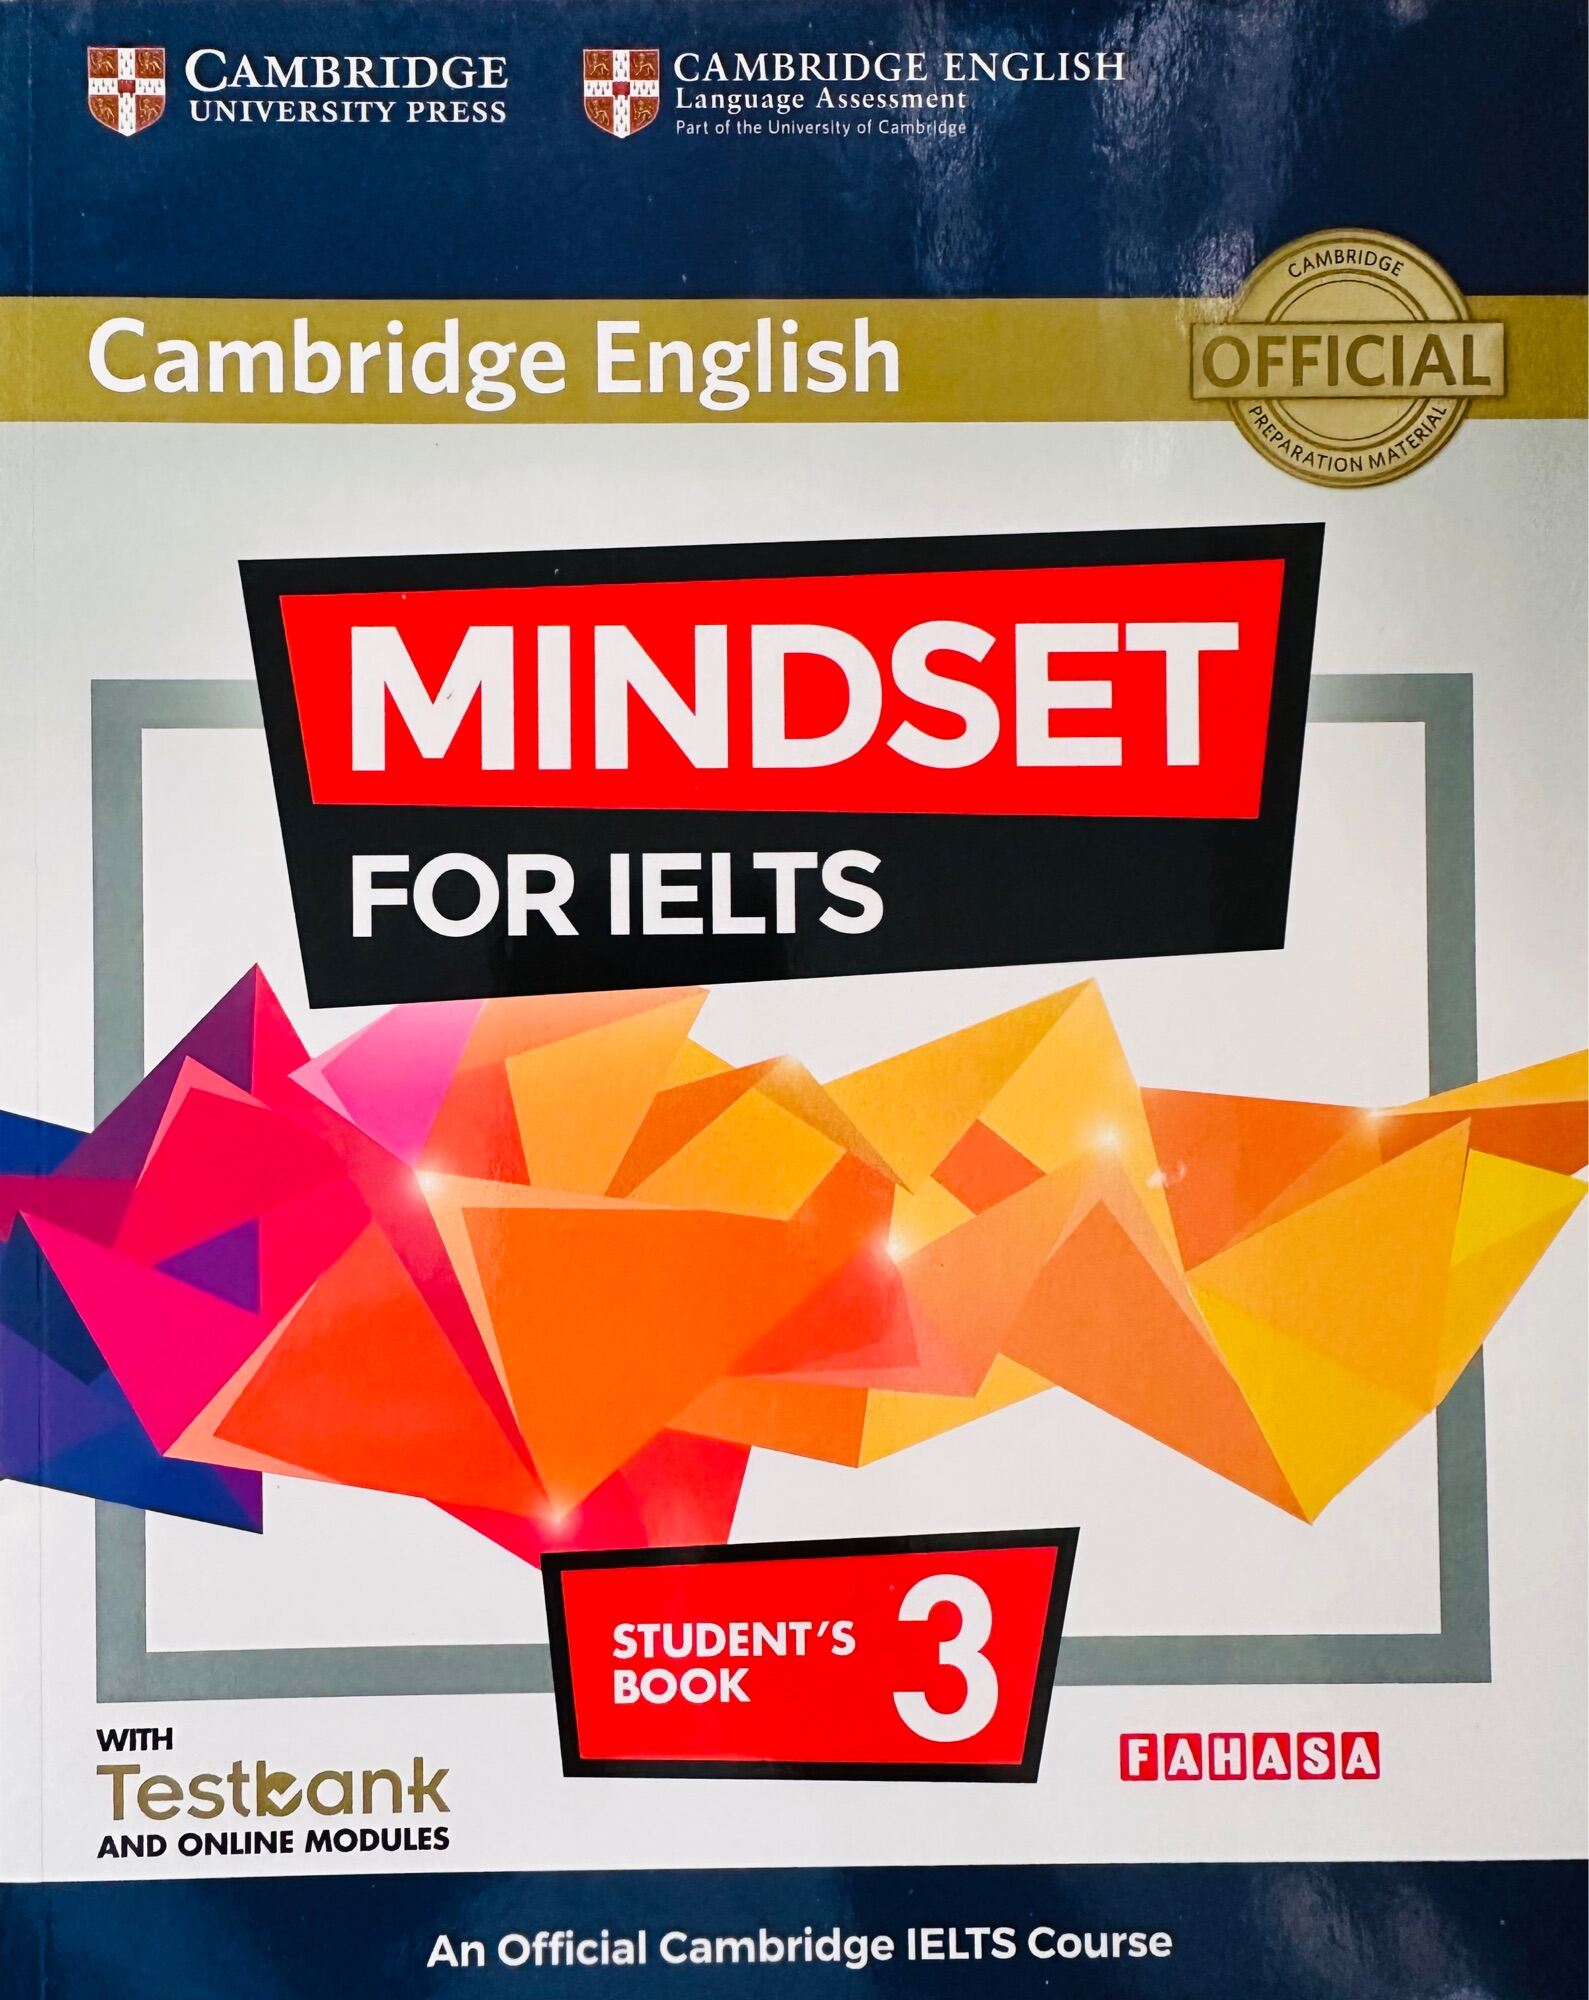 Cambridge English - Mindset For Ielts 3 code for textbank online